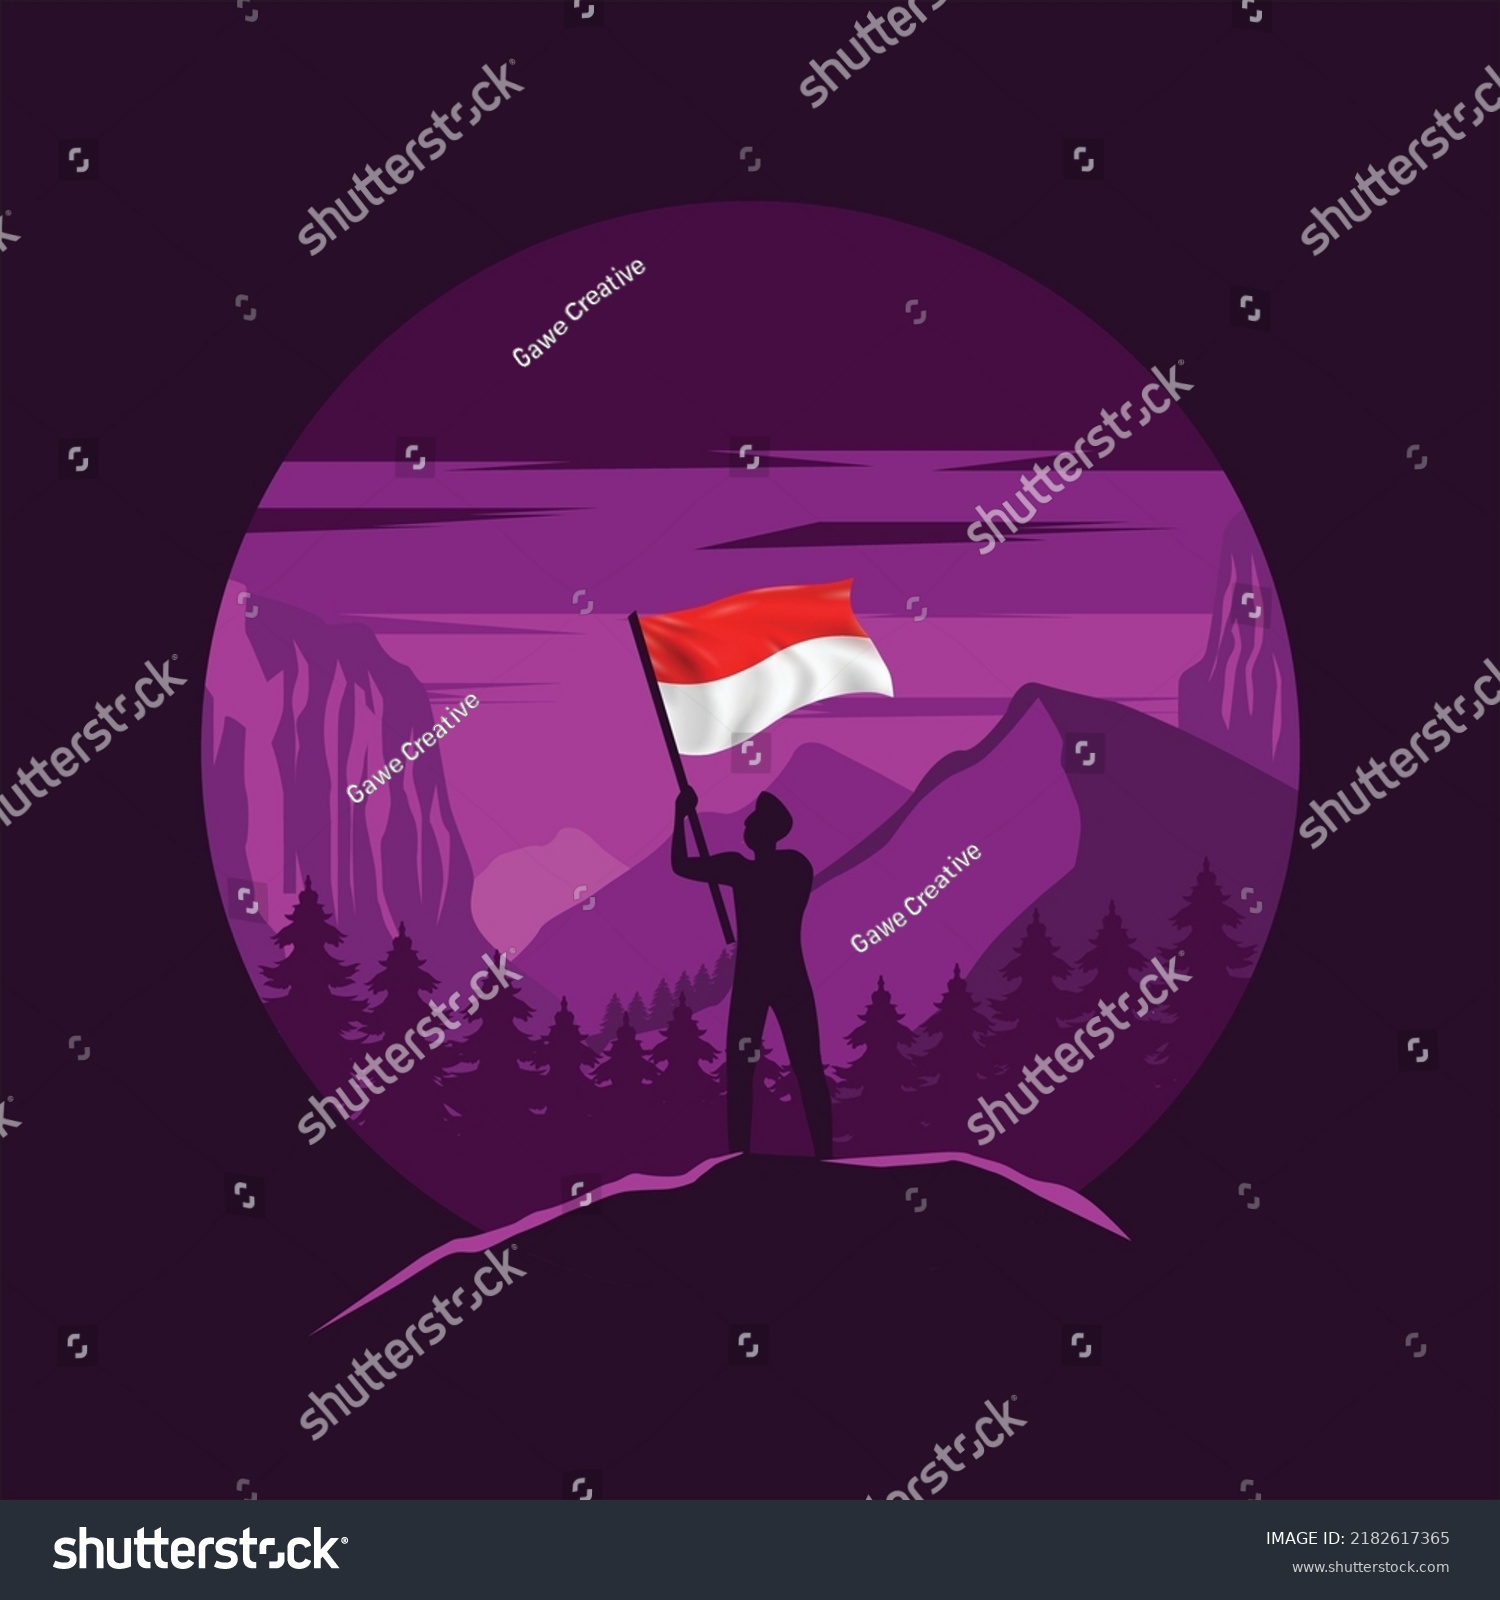 Indonesia Independence Day Graphic Illustration Stock Vector Royalty Free 2182617365 1455